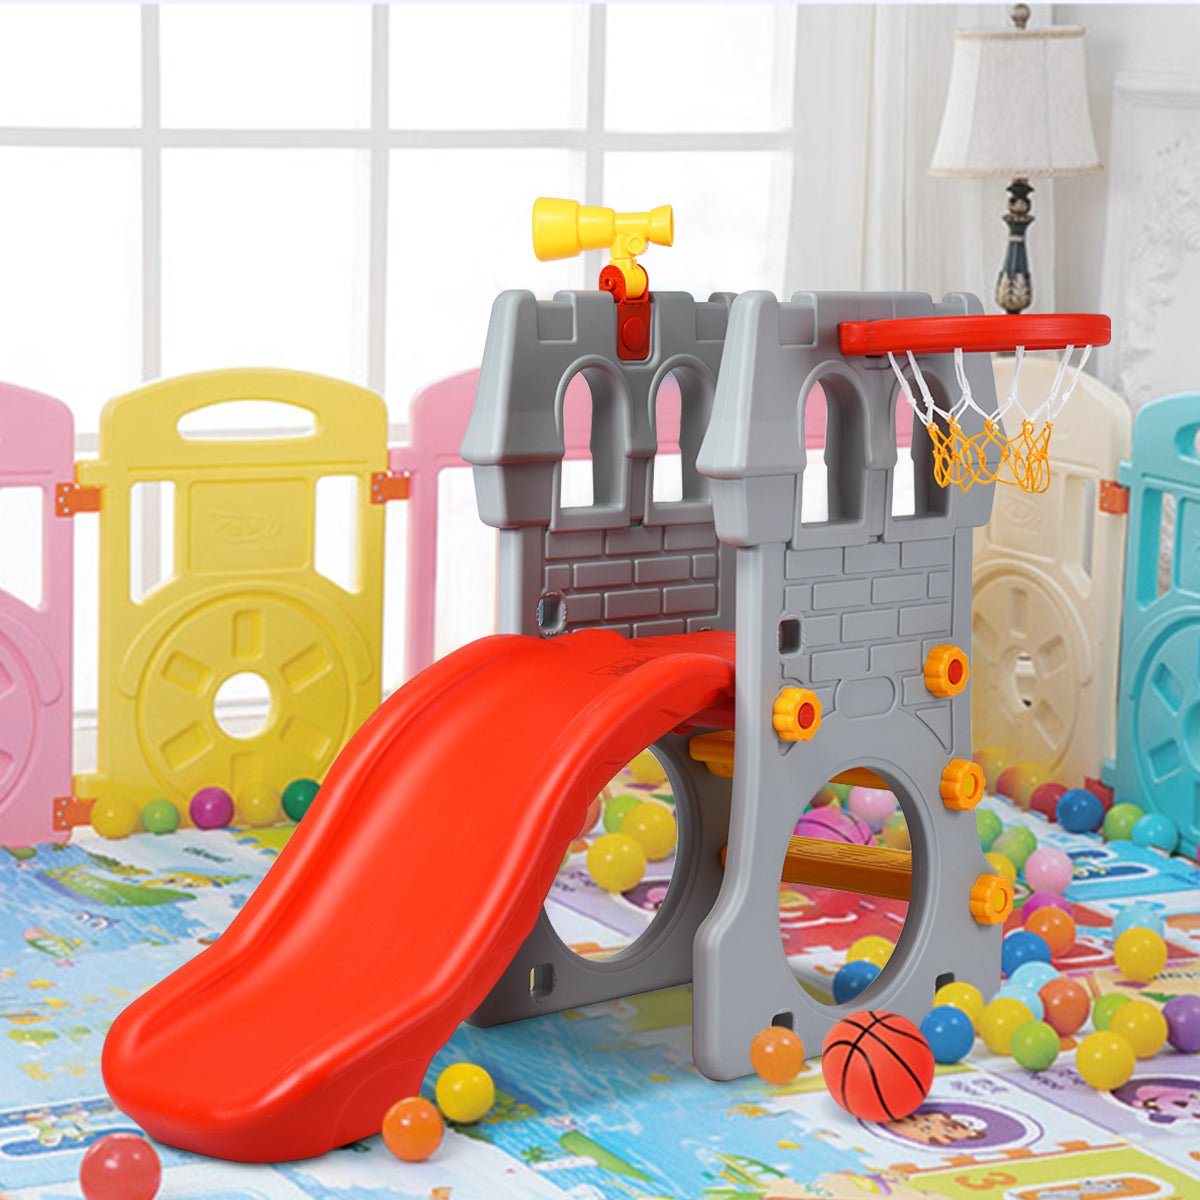 Interactive Climber Slide Set - Includes Basketball Hoop for Kids Play